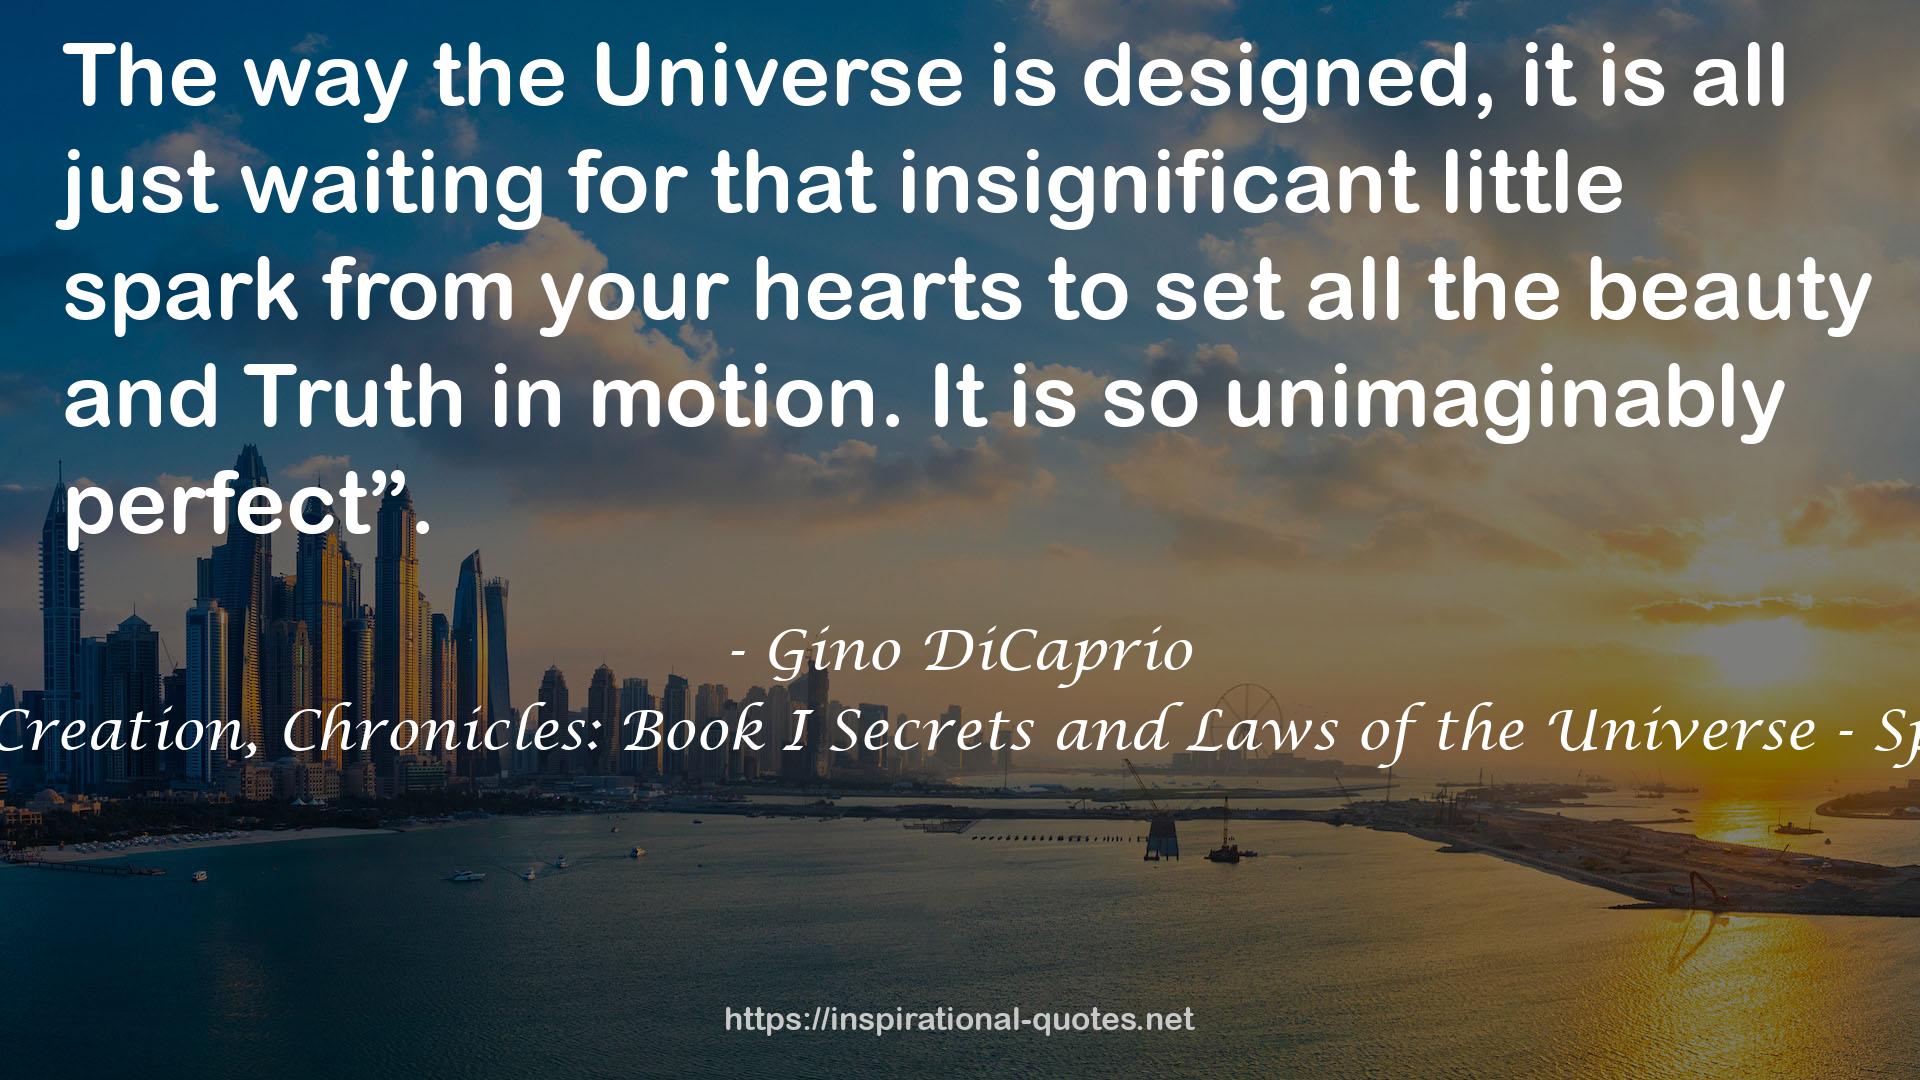 The Universal Law of Creation, Chronicles: Book I Secrets and Laws of the Universe - Special Updated Edition QUOTES